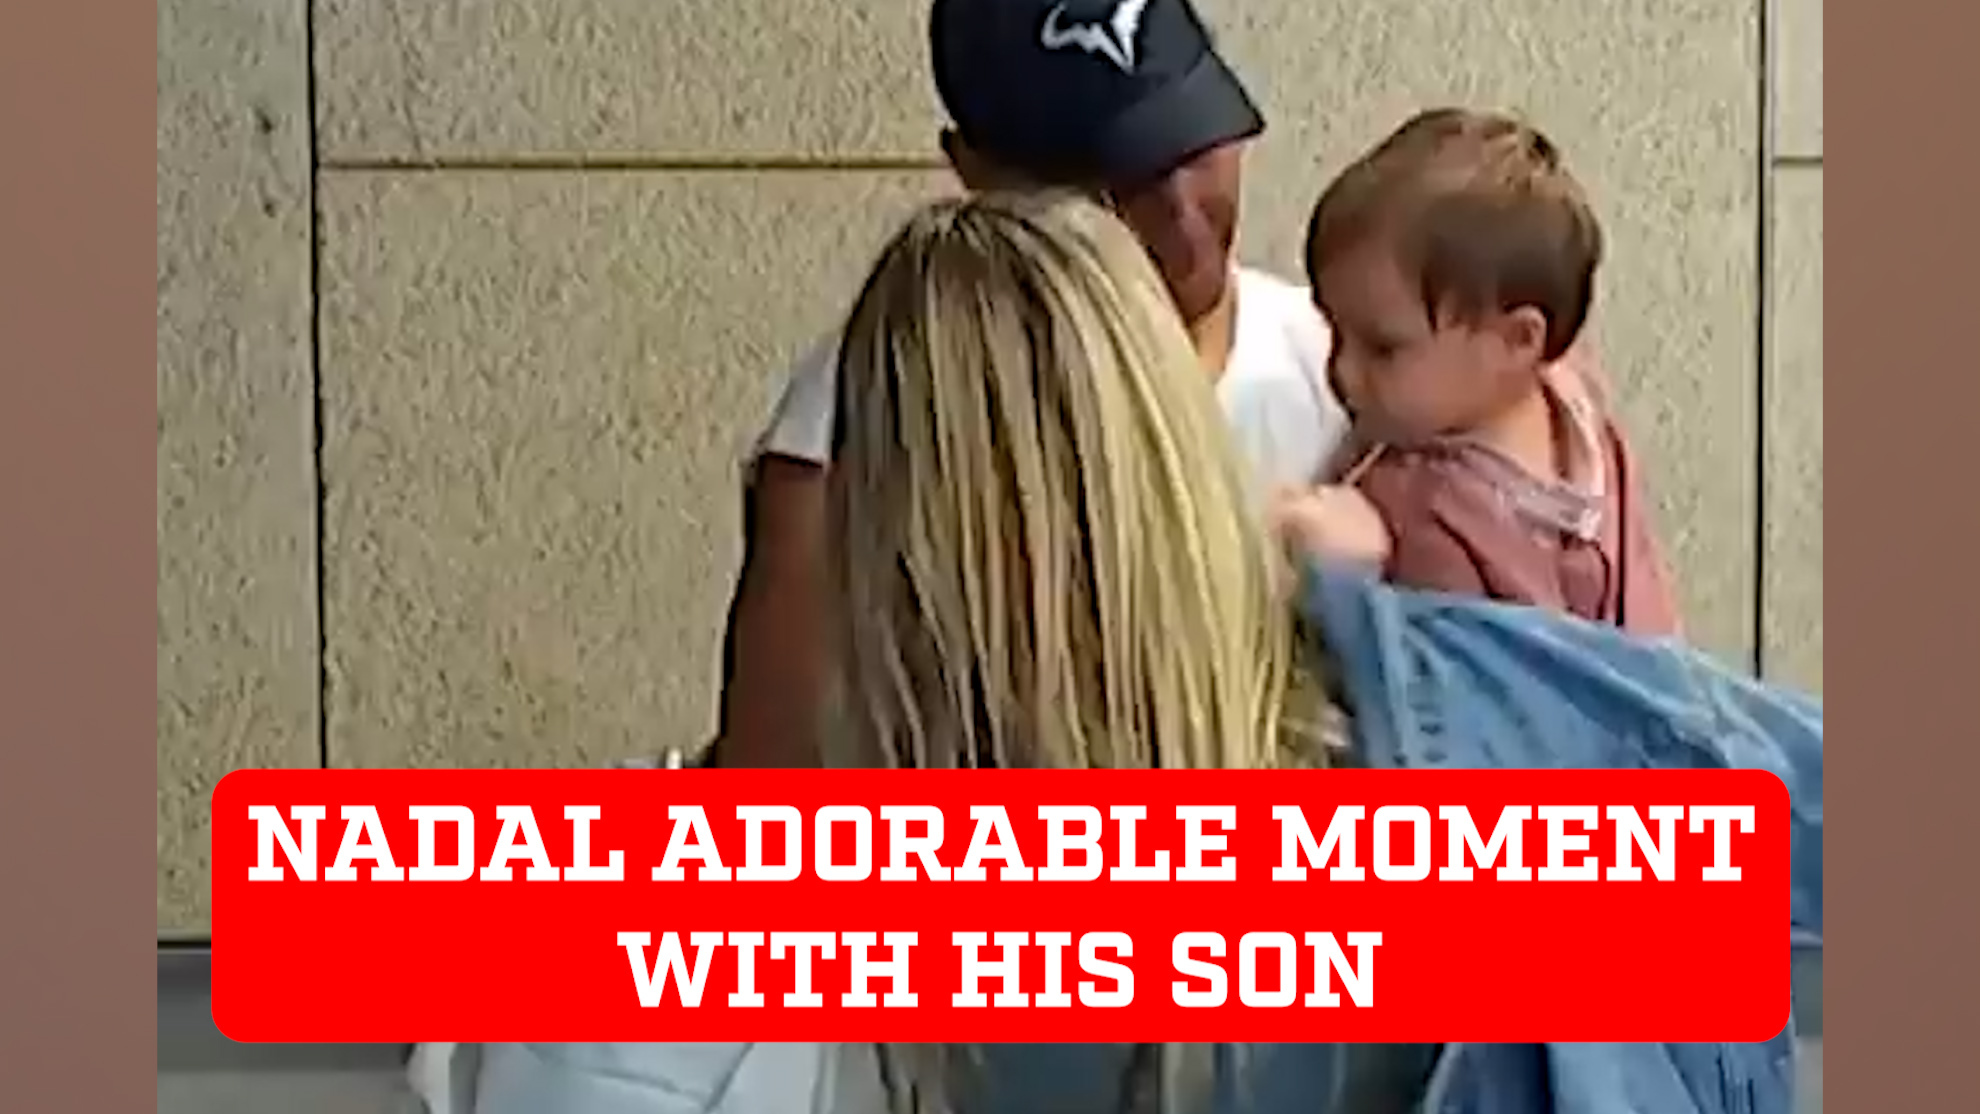 Rafael Nadal holds and kisses his son in adorable moment at Madrid Open